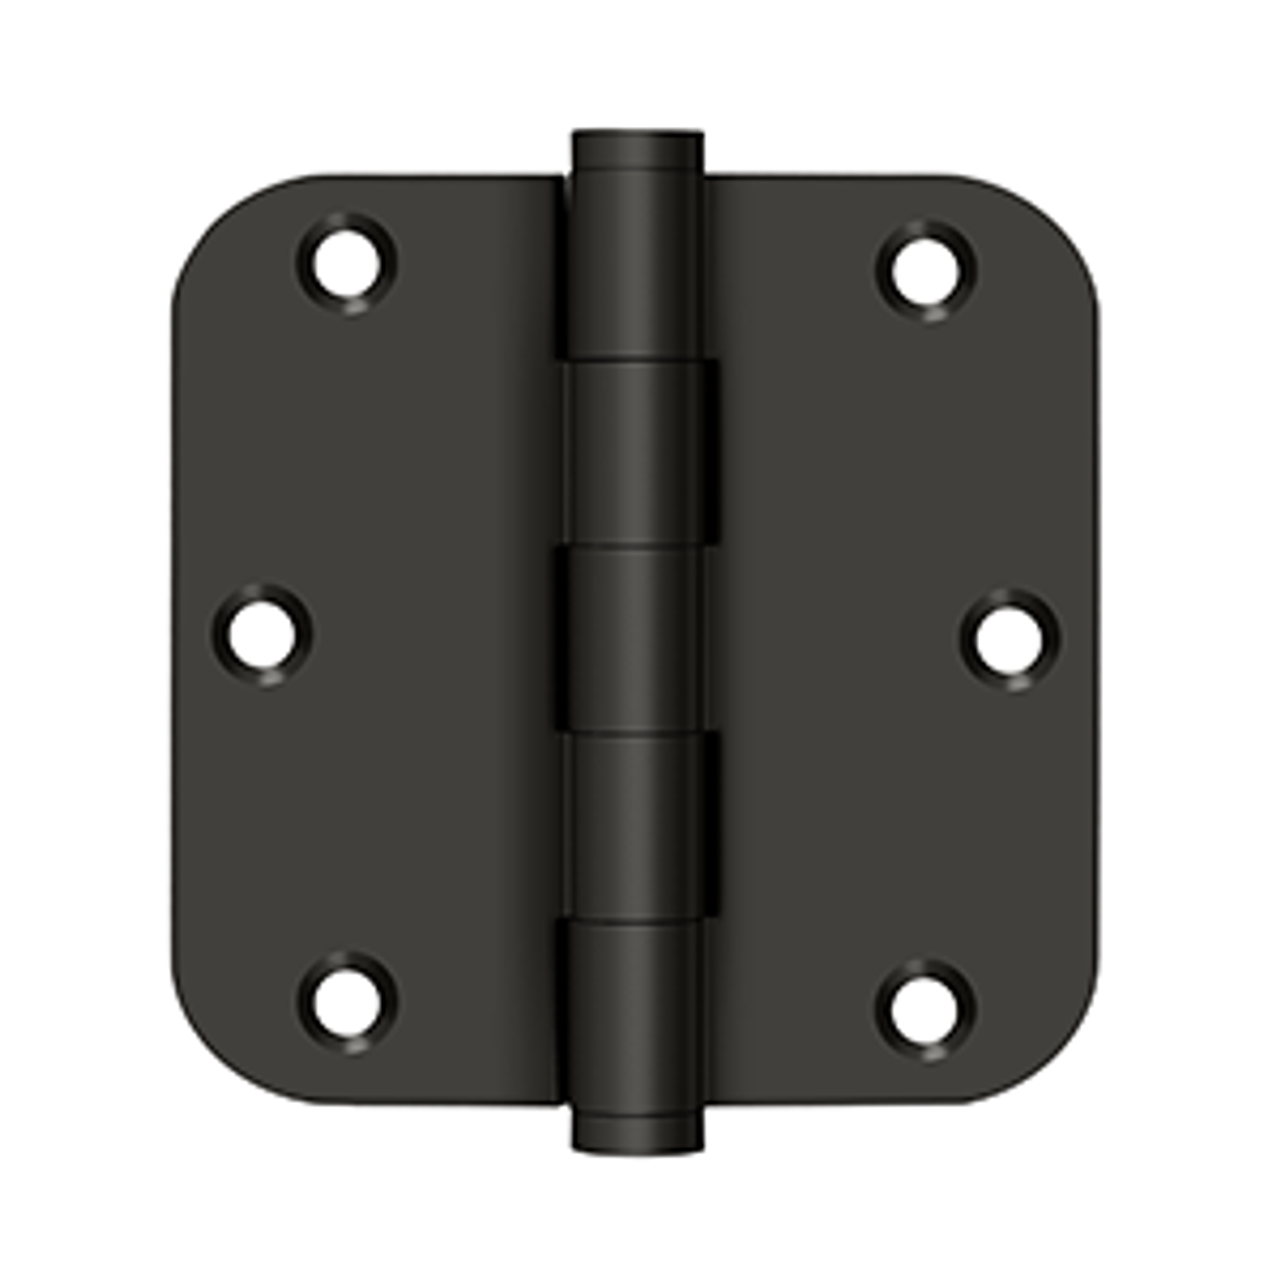 Deltana DSB35R5R SERIES RESIDENTIAL SOLID BRASS 3-1/2" X 3-1/2" X 5/8" RADIUS HINGES